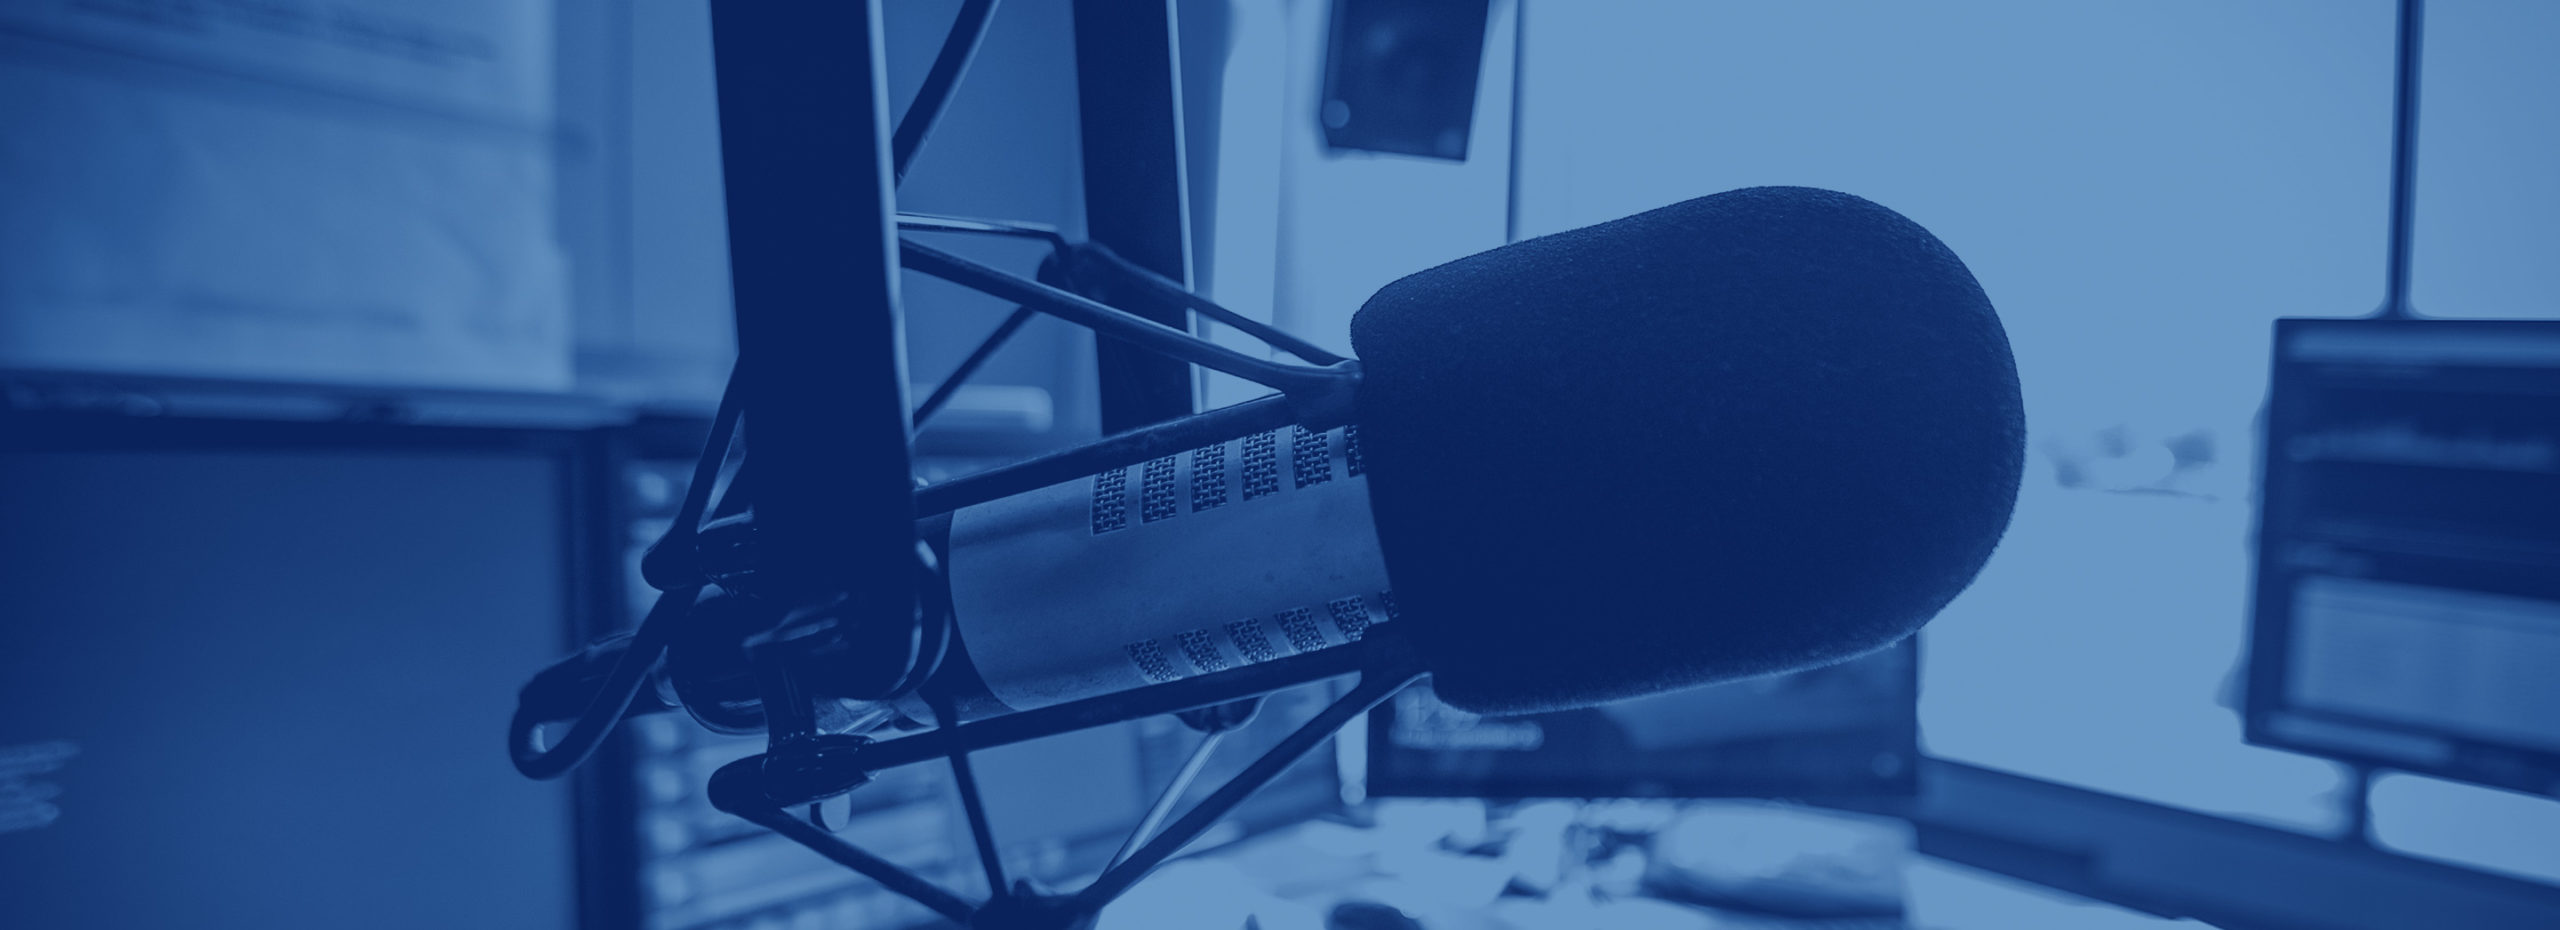 Radio Ad Revenue Expected to Decrease in 2022: How You Can Close the Gap